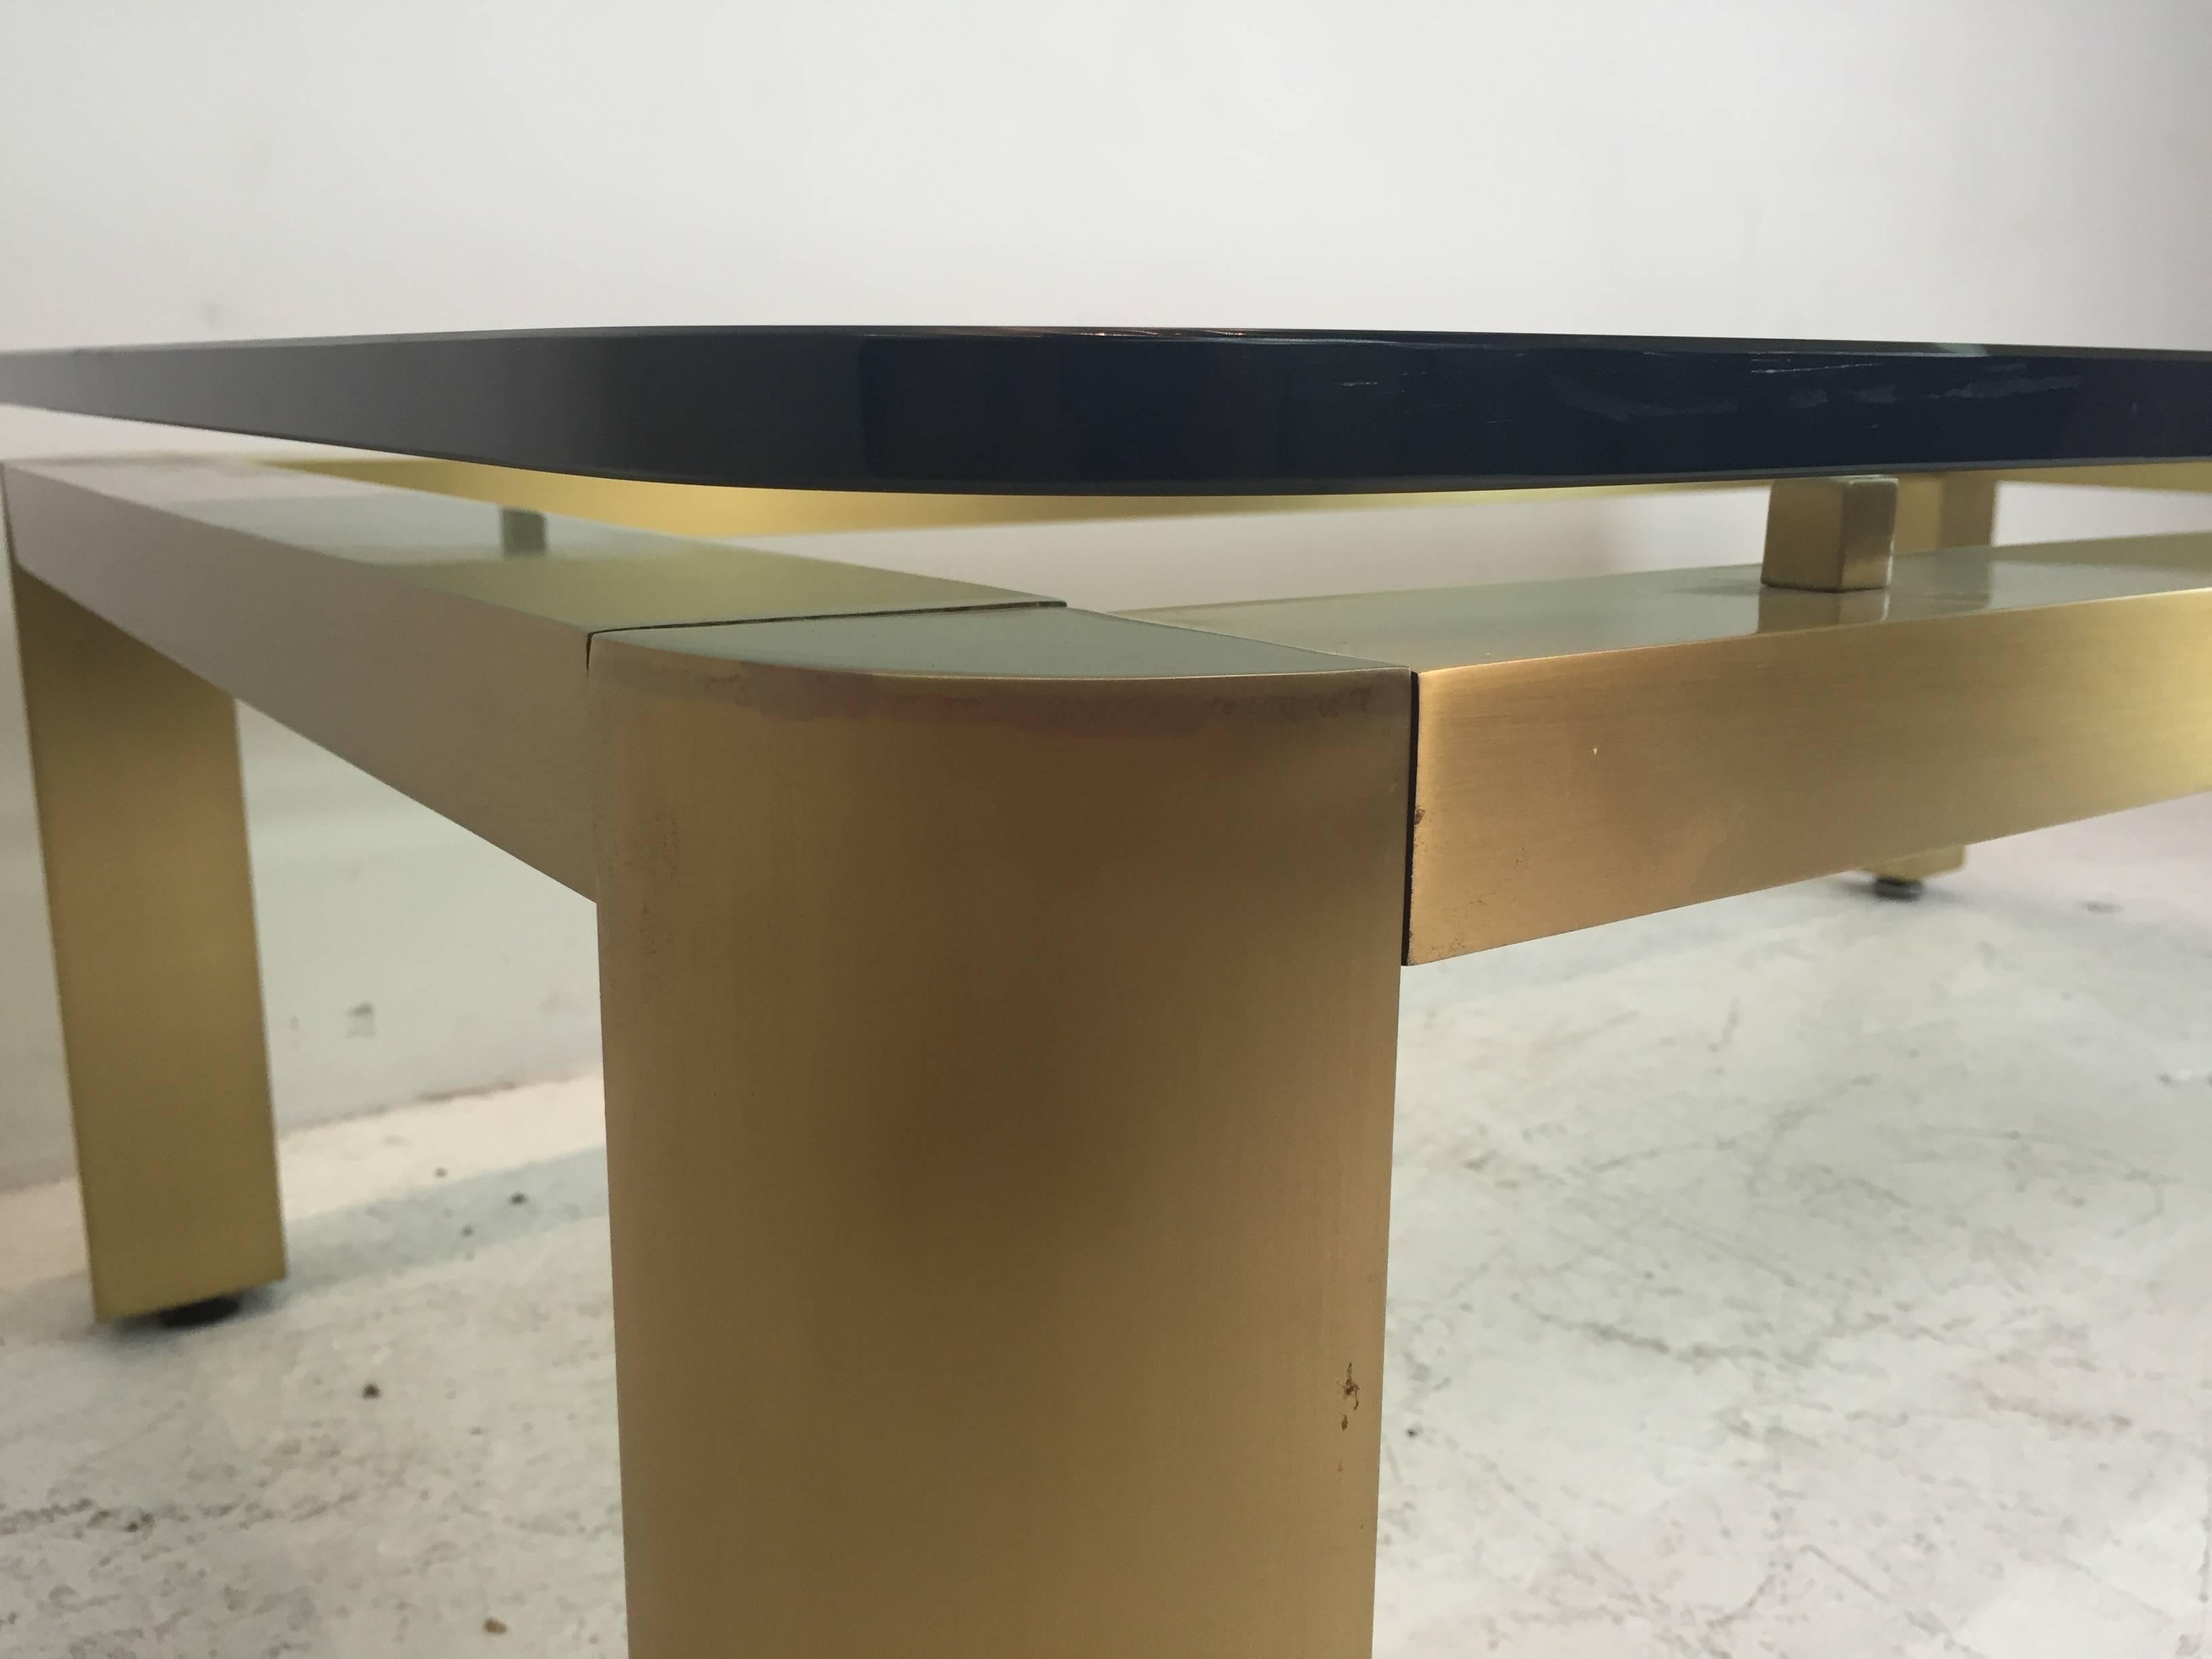 A stylish 1970s brushed brass coffee table with floating glass top. The brass has a wonderful shimmer effect. The table has been well cared for from it's original owner and in excellent vintage condition.